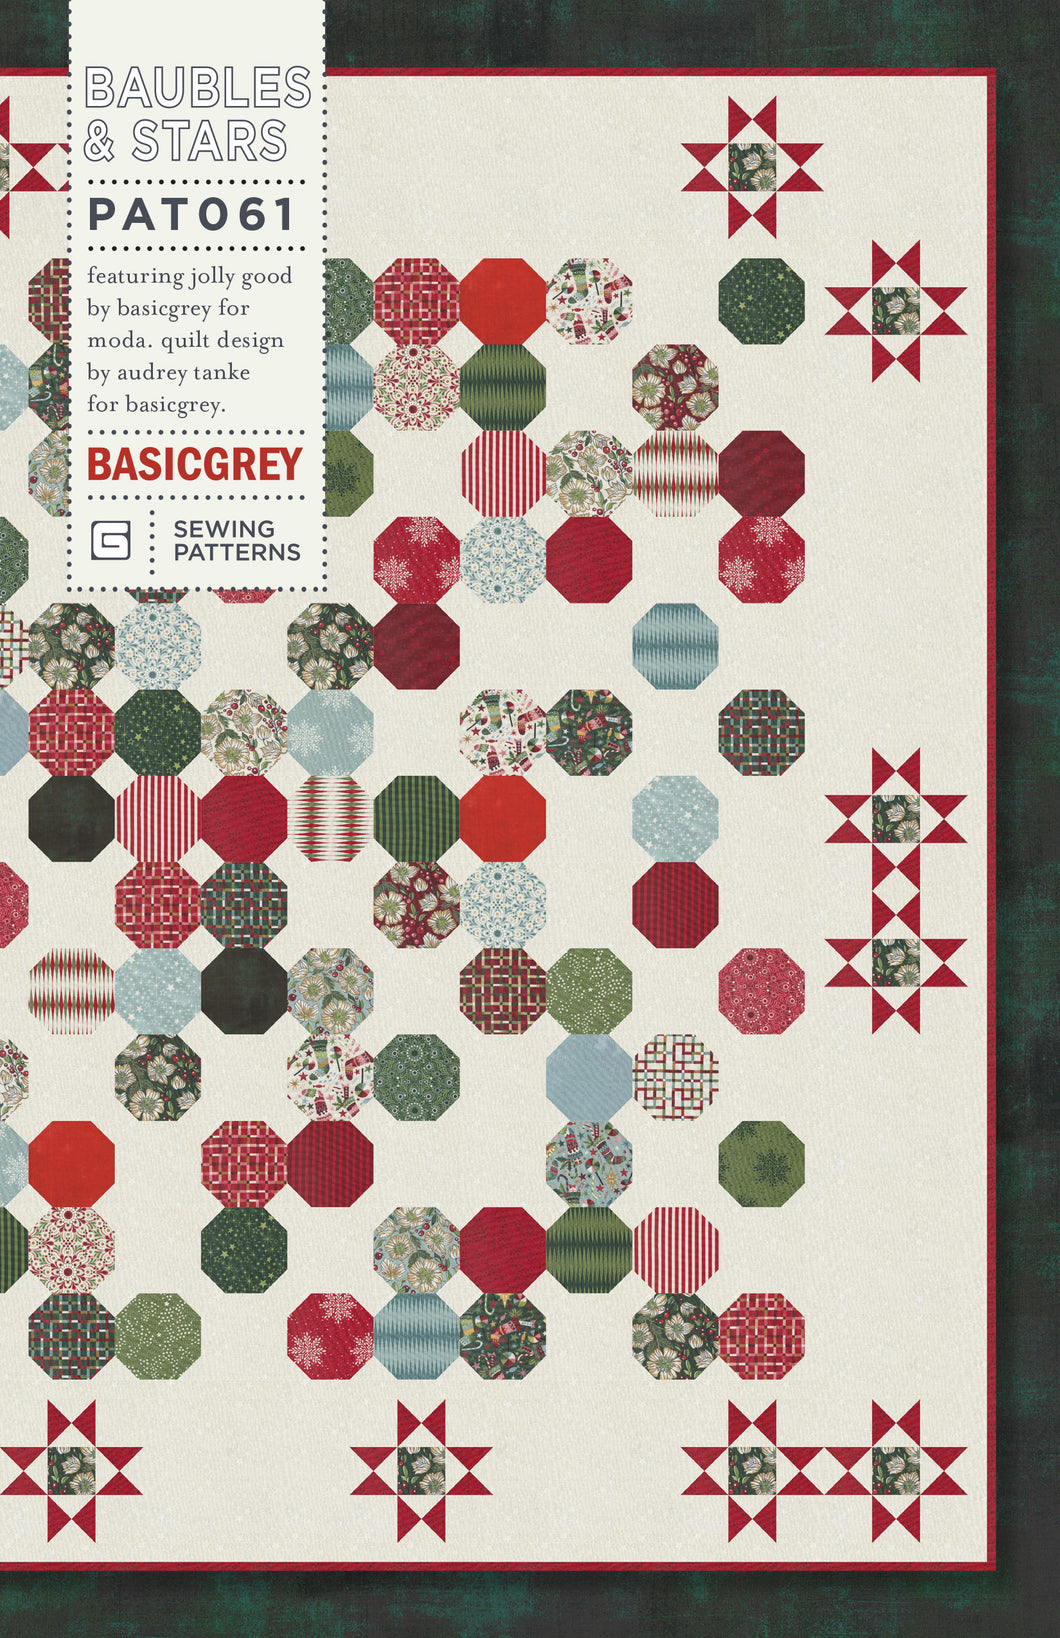 Baubles & Stars Christmas quilt by Audrey Tanke for BasicGrey. Fabric is Jolly Good by BasicGrey for Moda Fabrics. Make it with charm packs or a layer cake.